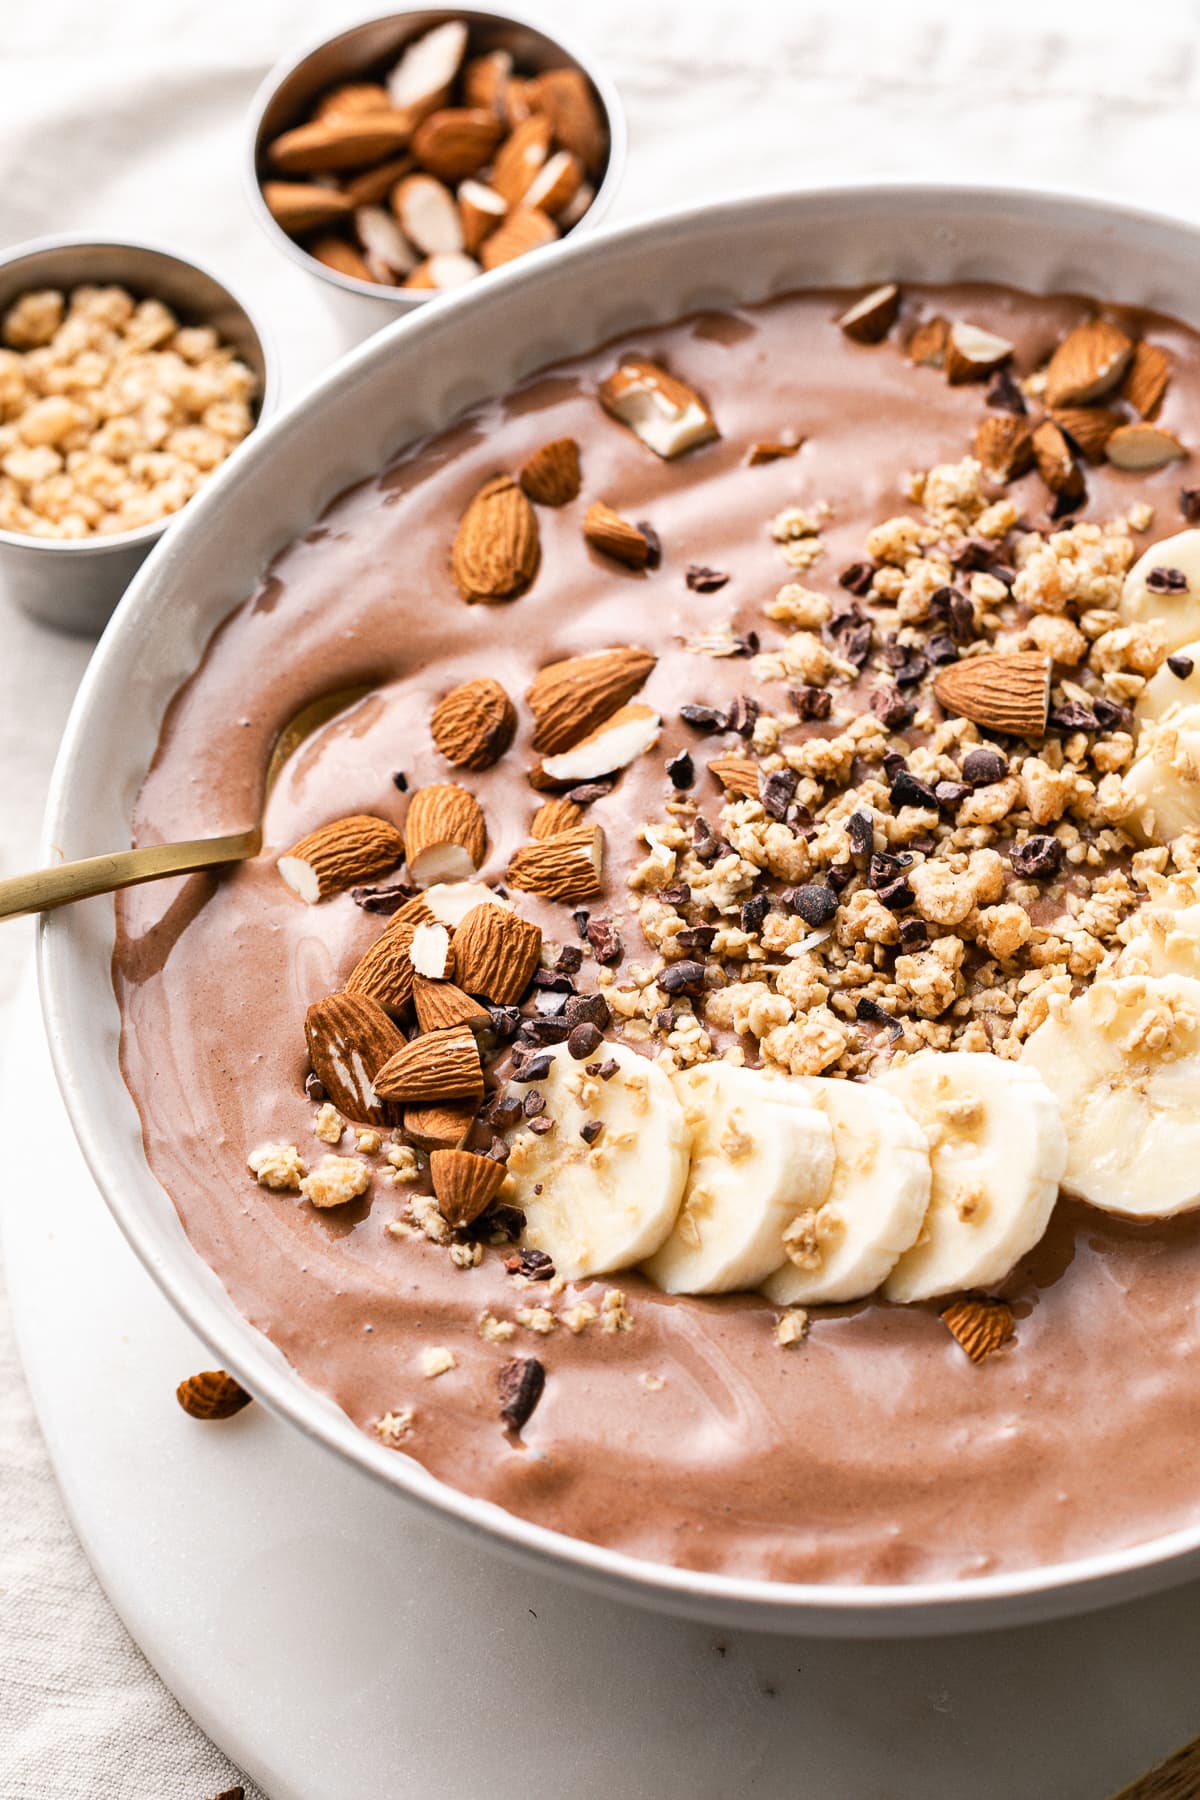 side angle view of chocolate almond butter smoothie in a bowl with items surrounding.